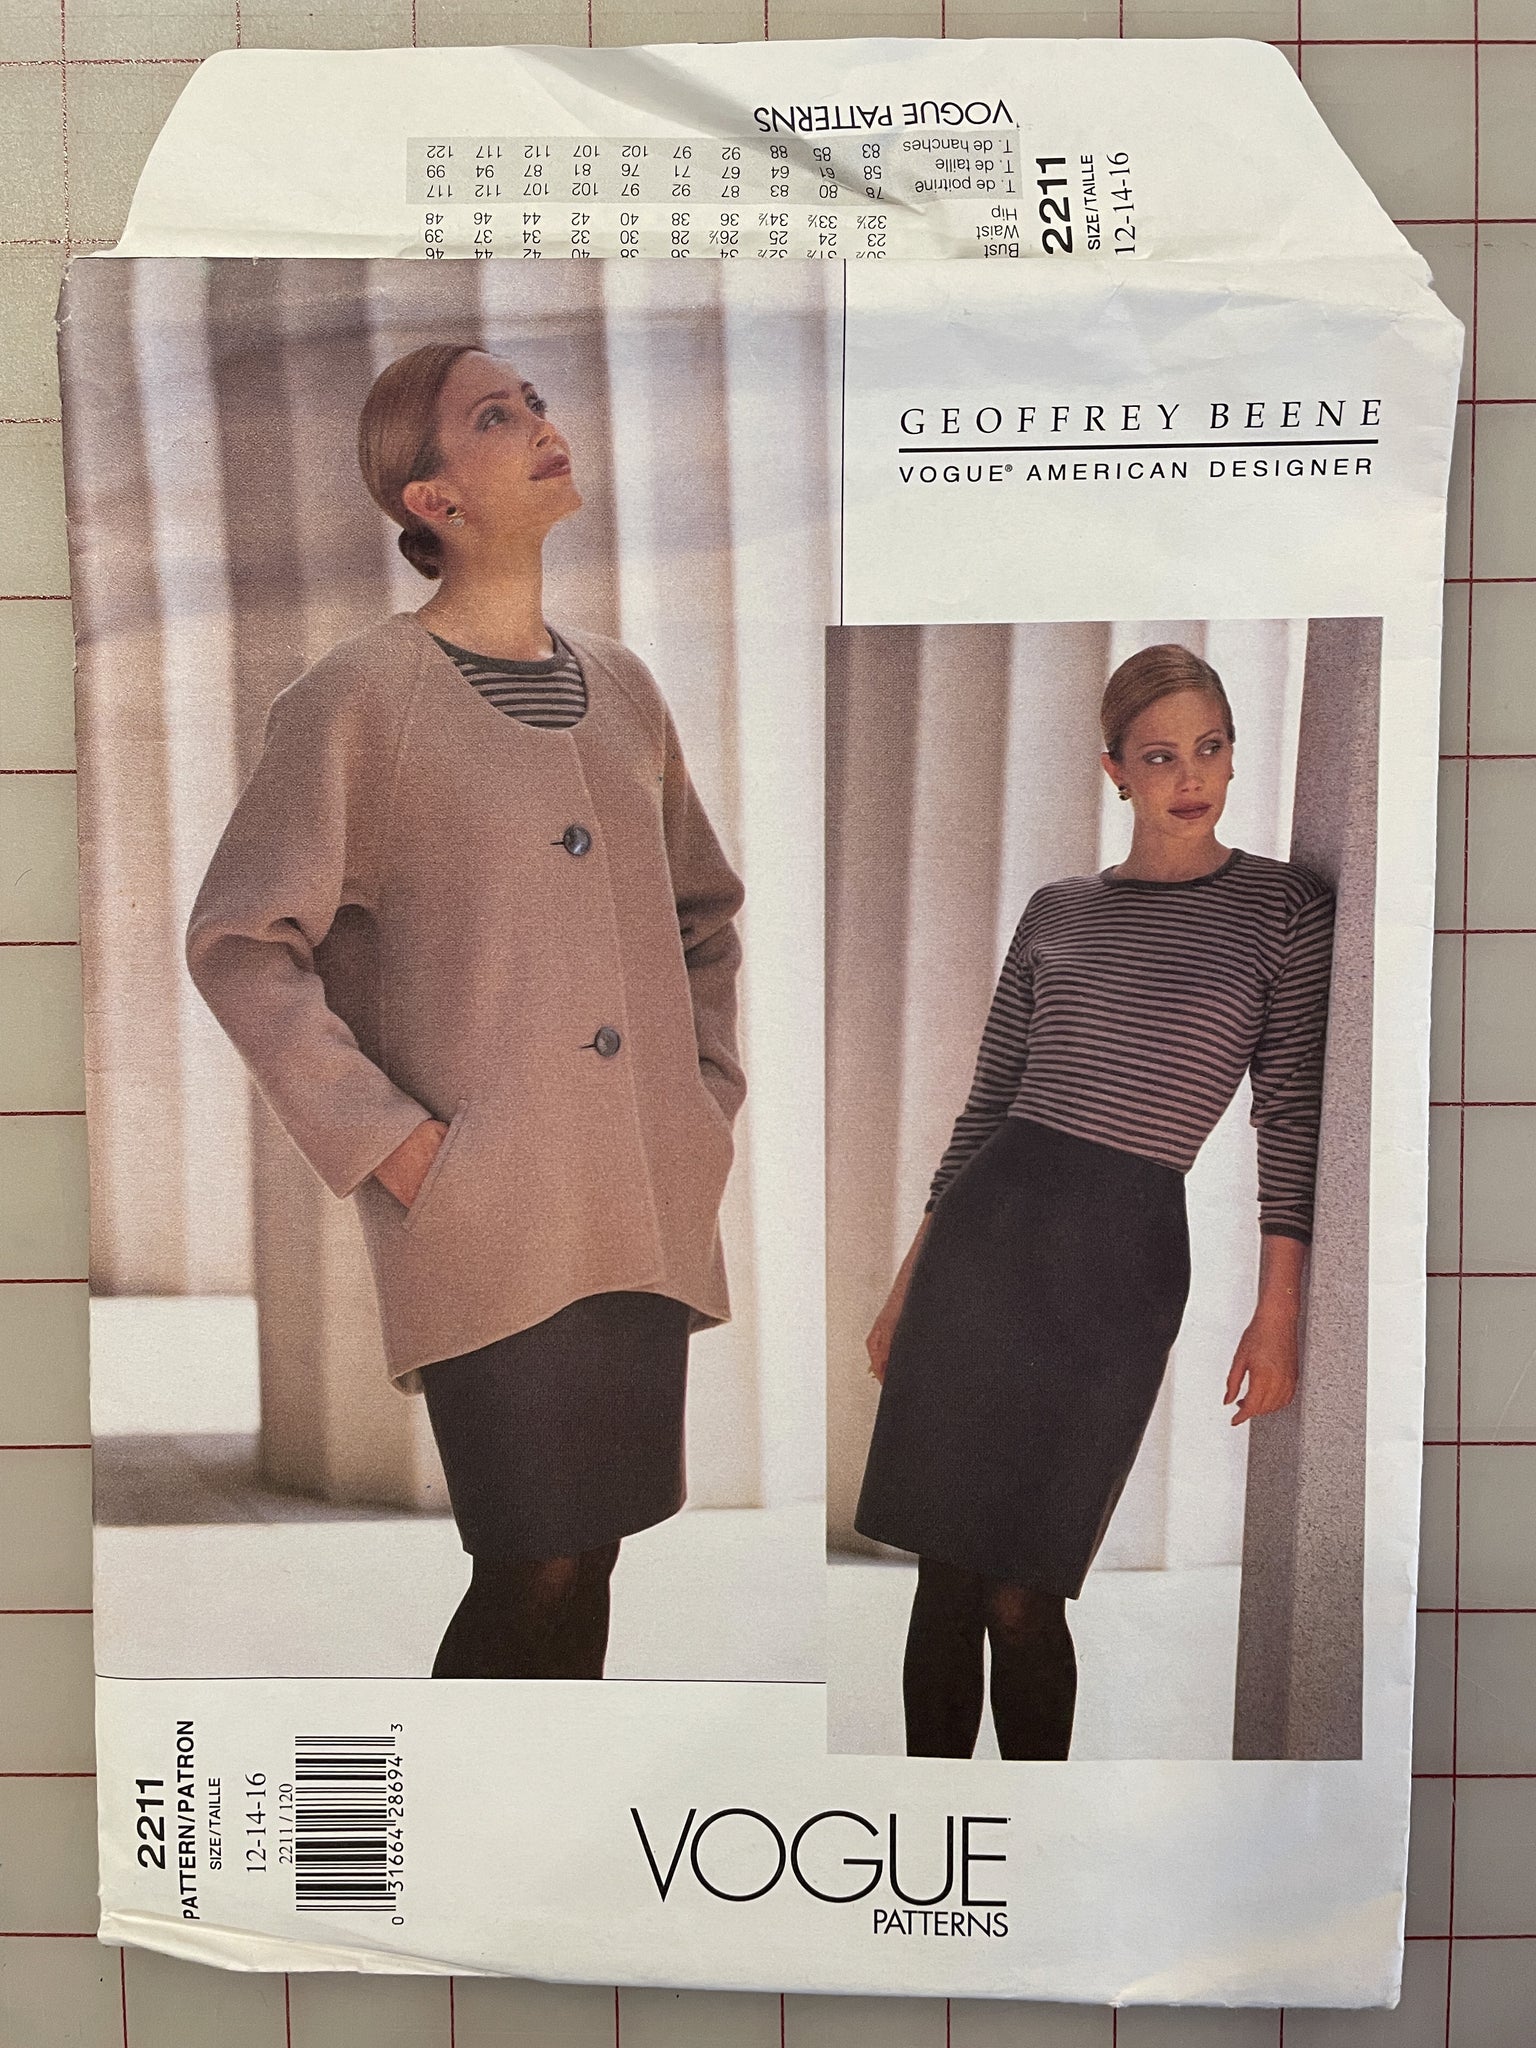 SALE 1998 Vogue 2211 Pattern - Jacket and Skirt FACTORY FOLDED